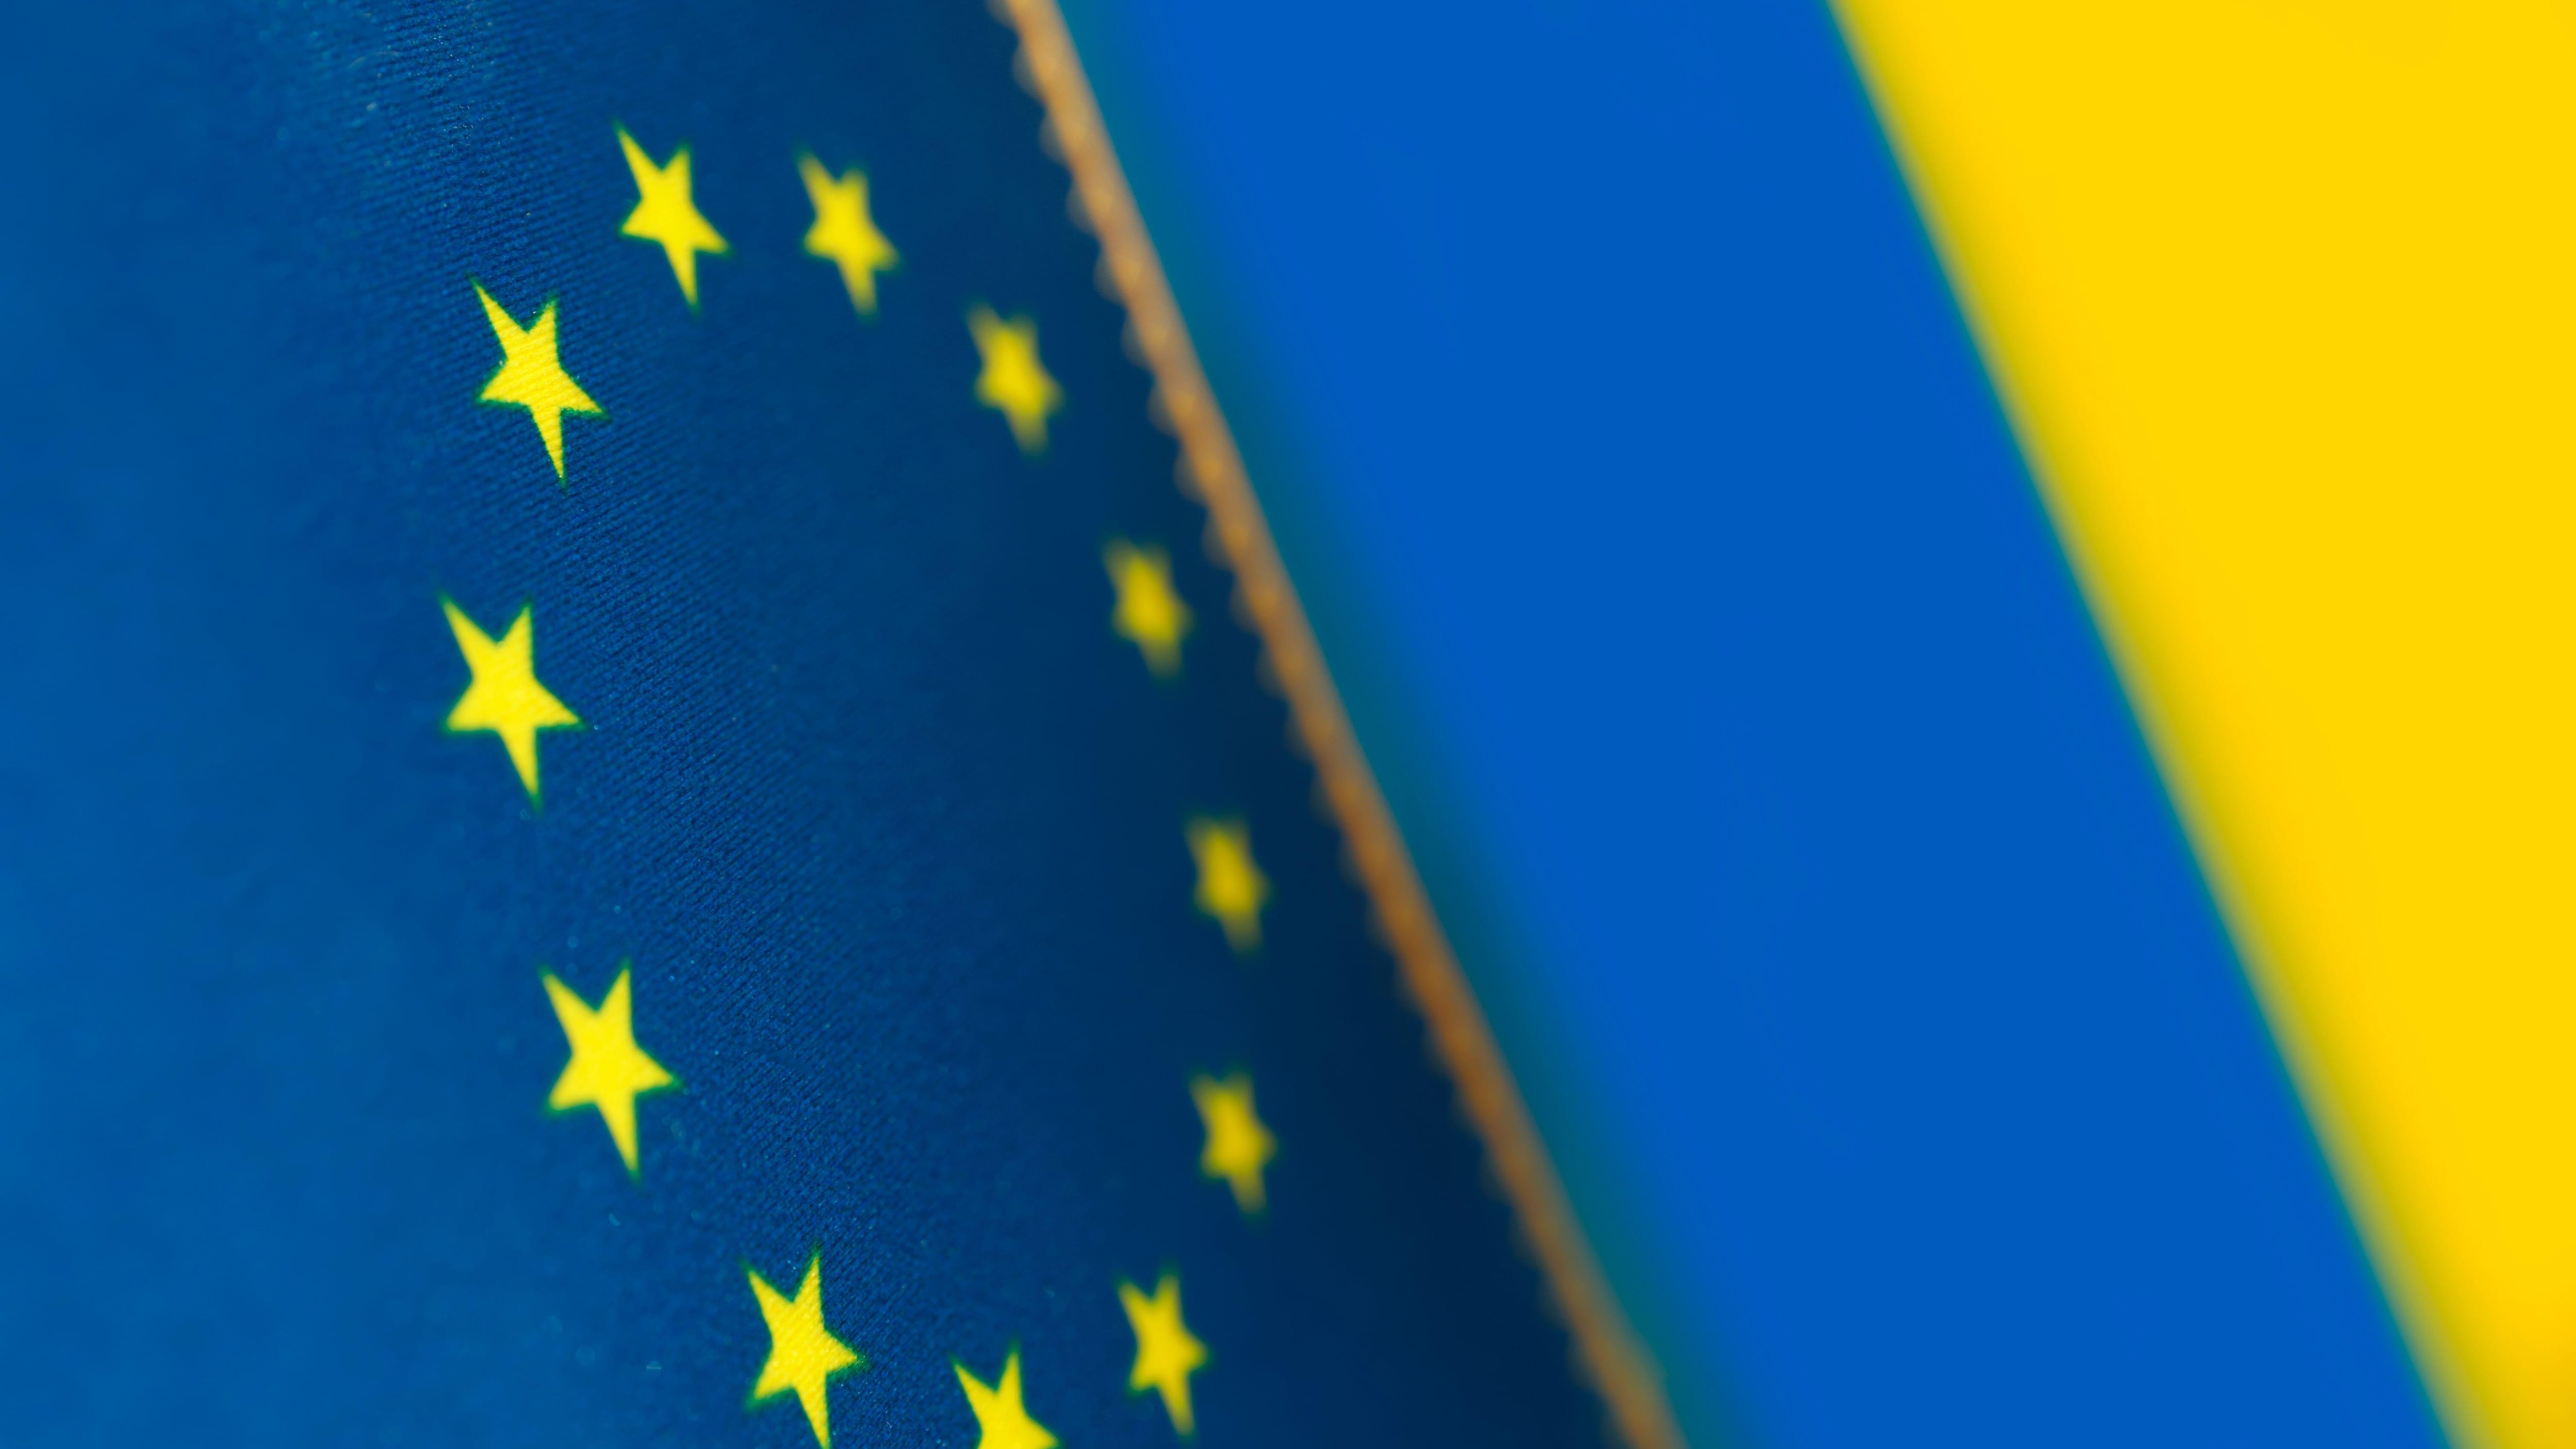 As a top grain producer Ukraine’s entry would have a huge impact on EU agriculture policy